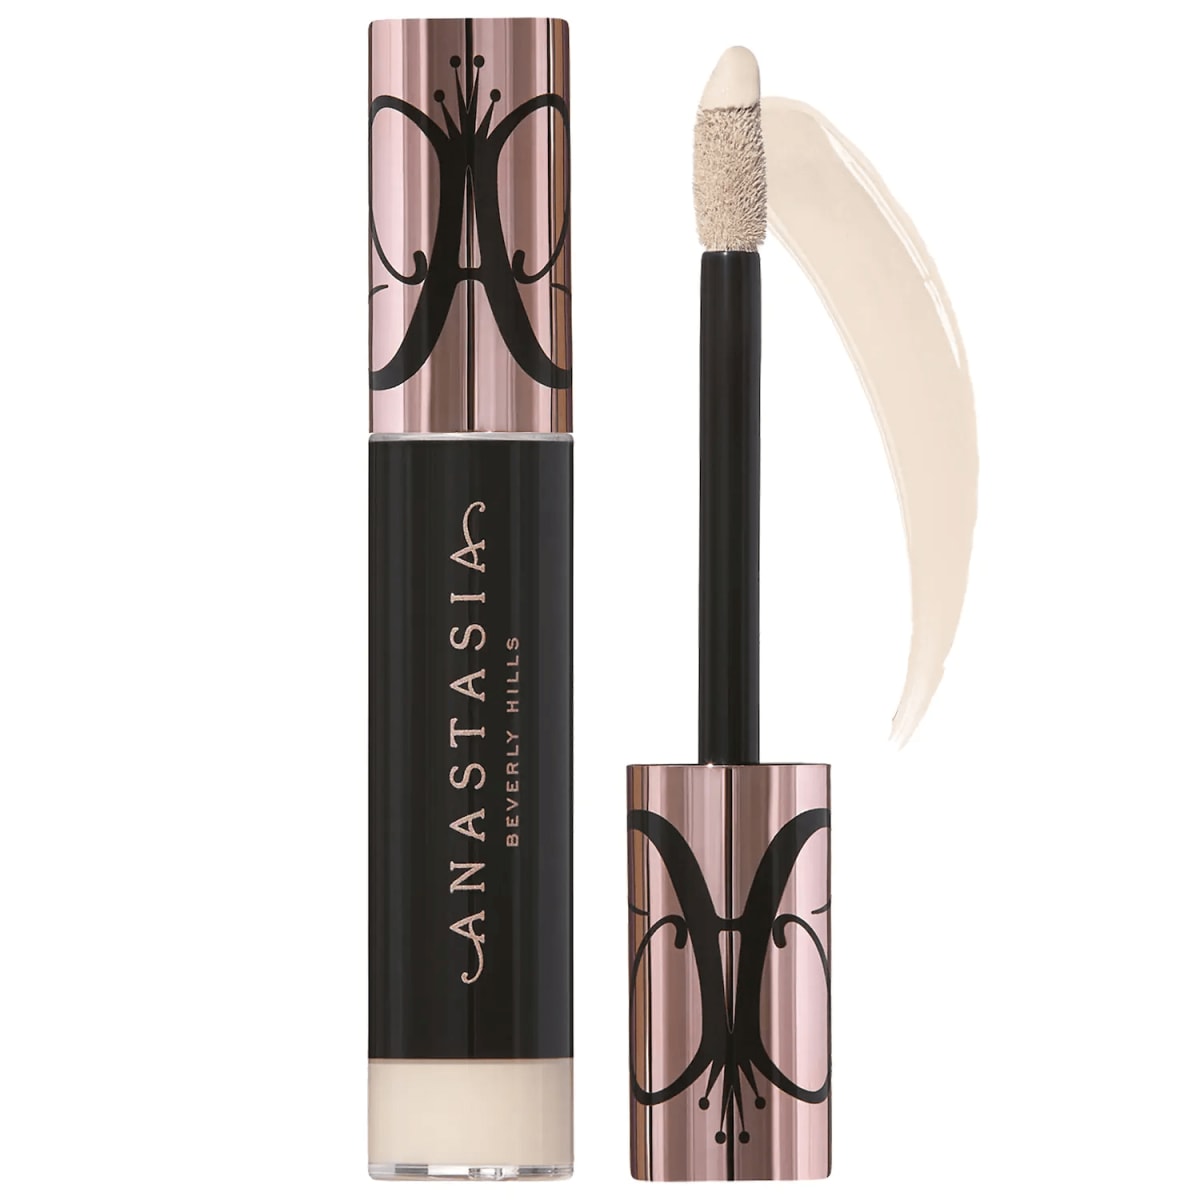 Anastasia Beverly Hills Magic Touch Concealer in 3